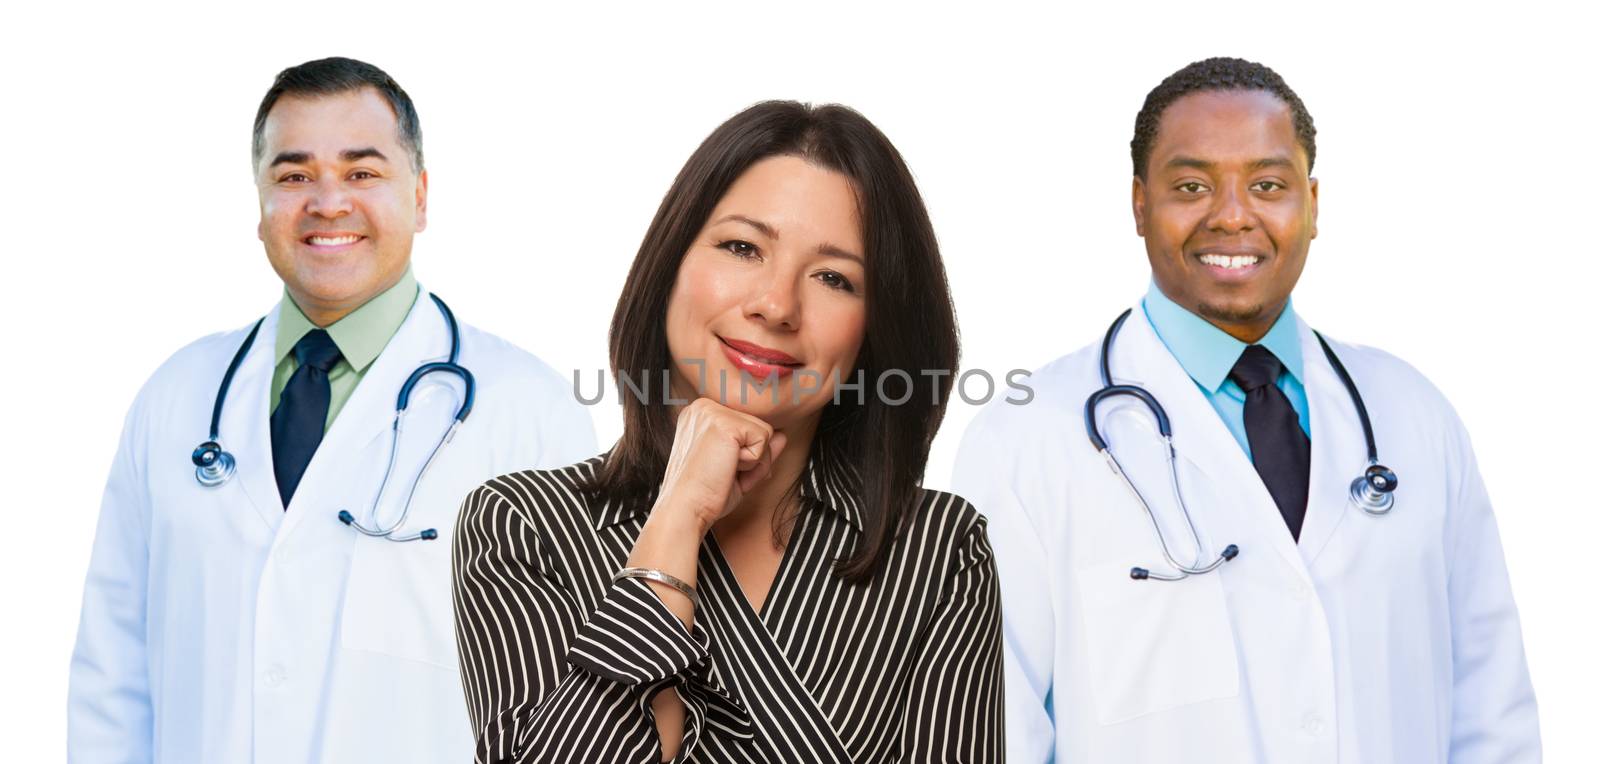 Two Mixed Race Doctors Behind Hispanic Woman Isolated on a White Background.